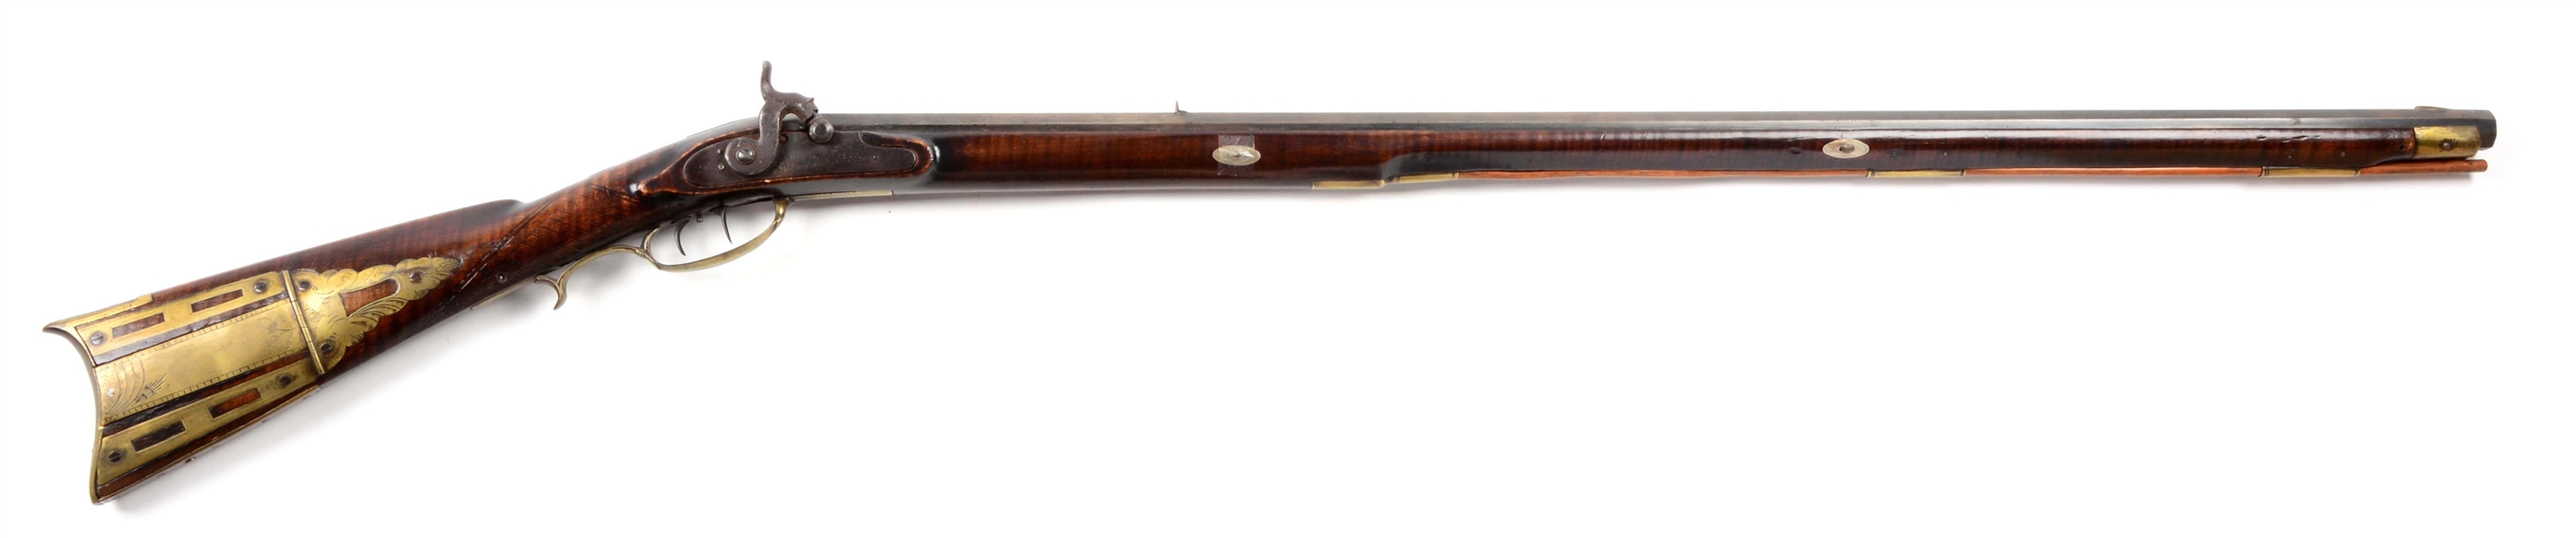 (A) FULLSTOCK FLINTLOCK KENTUCKY RIFLE STAMPED BY GOMPF OF LANCASTER.